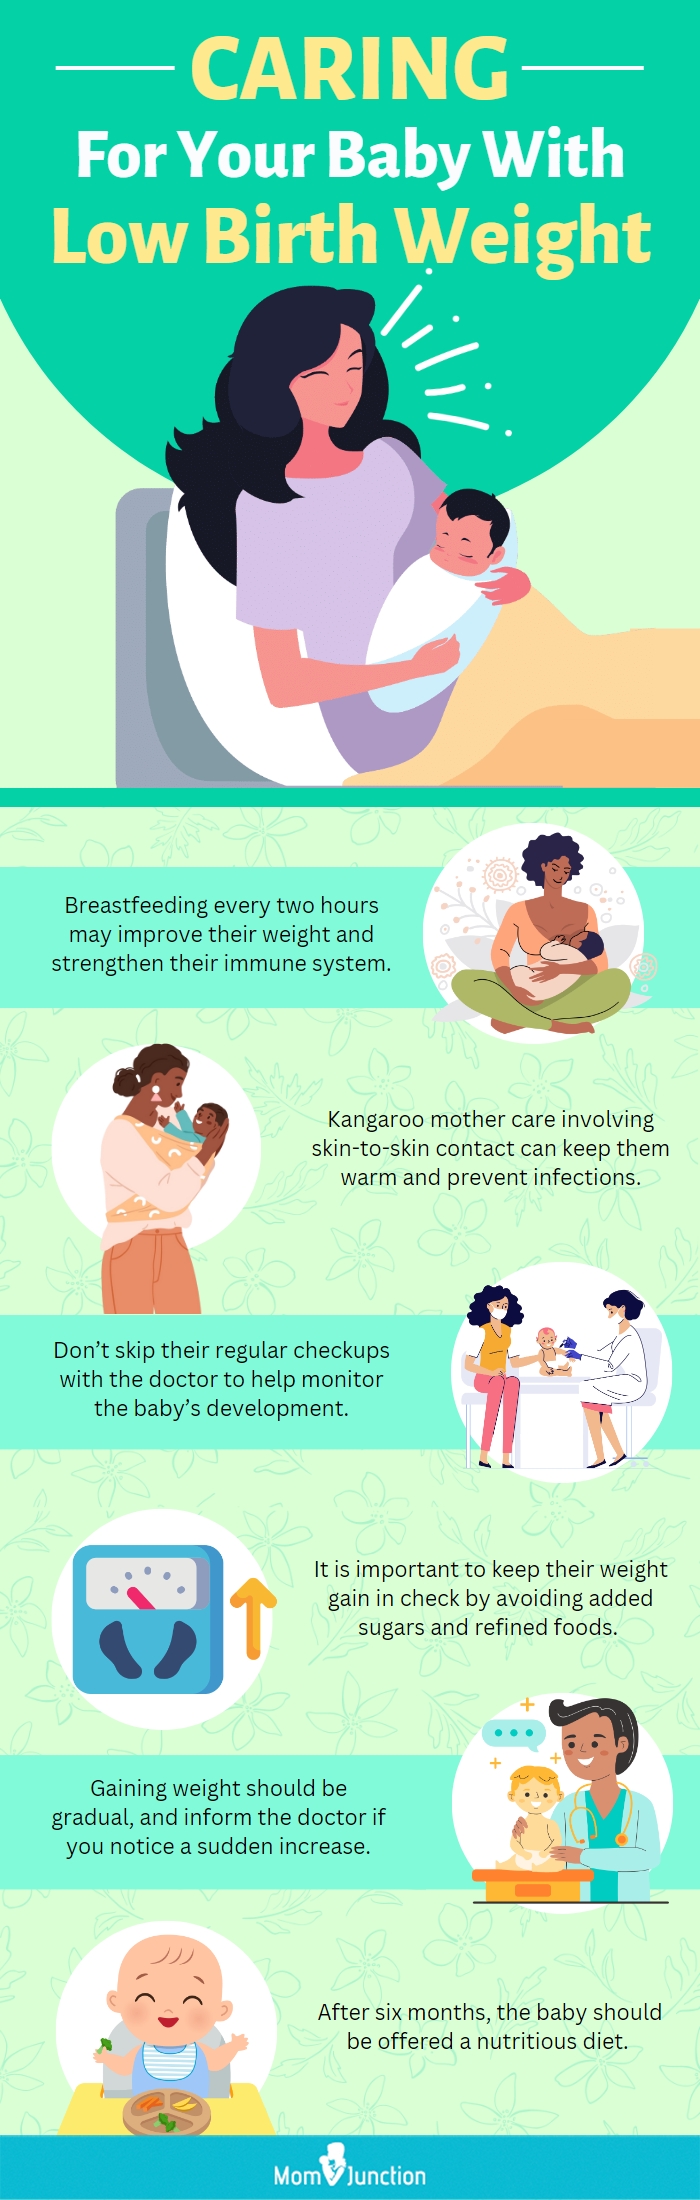 Low and Very Low Birth Weight Babies: Prevention Tips for